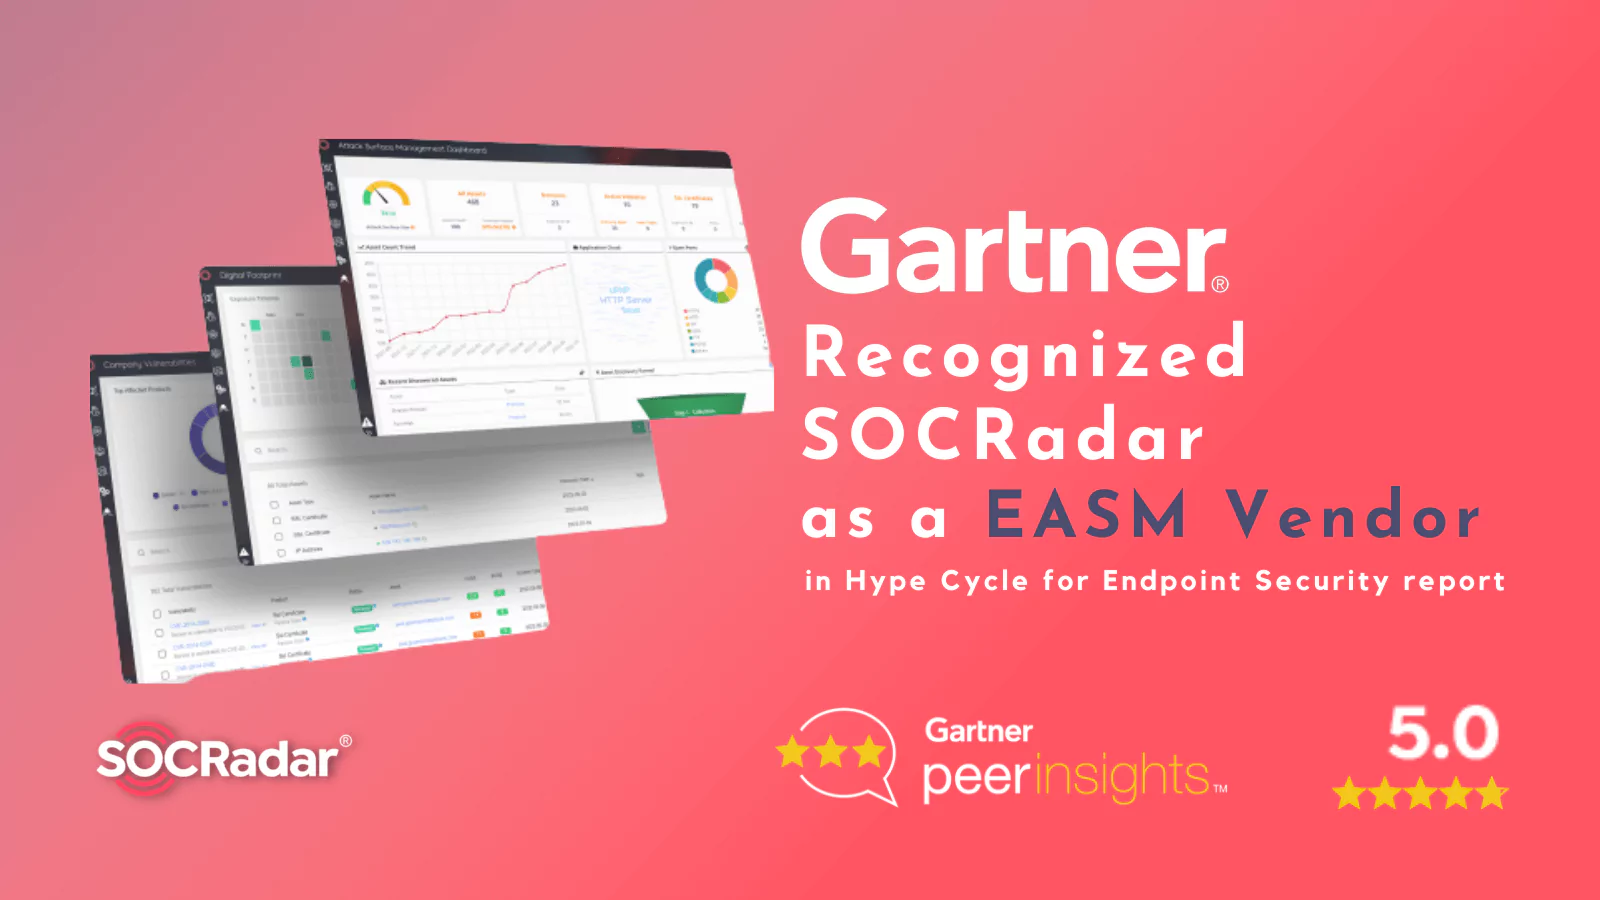 SOCRadar® Cyber Intelligence Inc. | Gartner Recognizes SOCRadar as an EASM Vendor in Hype Cycle for Endpoint Security Report